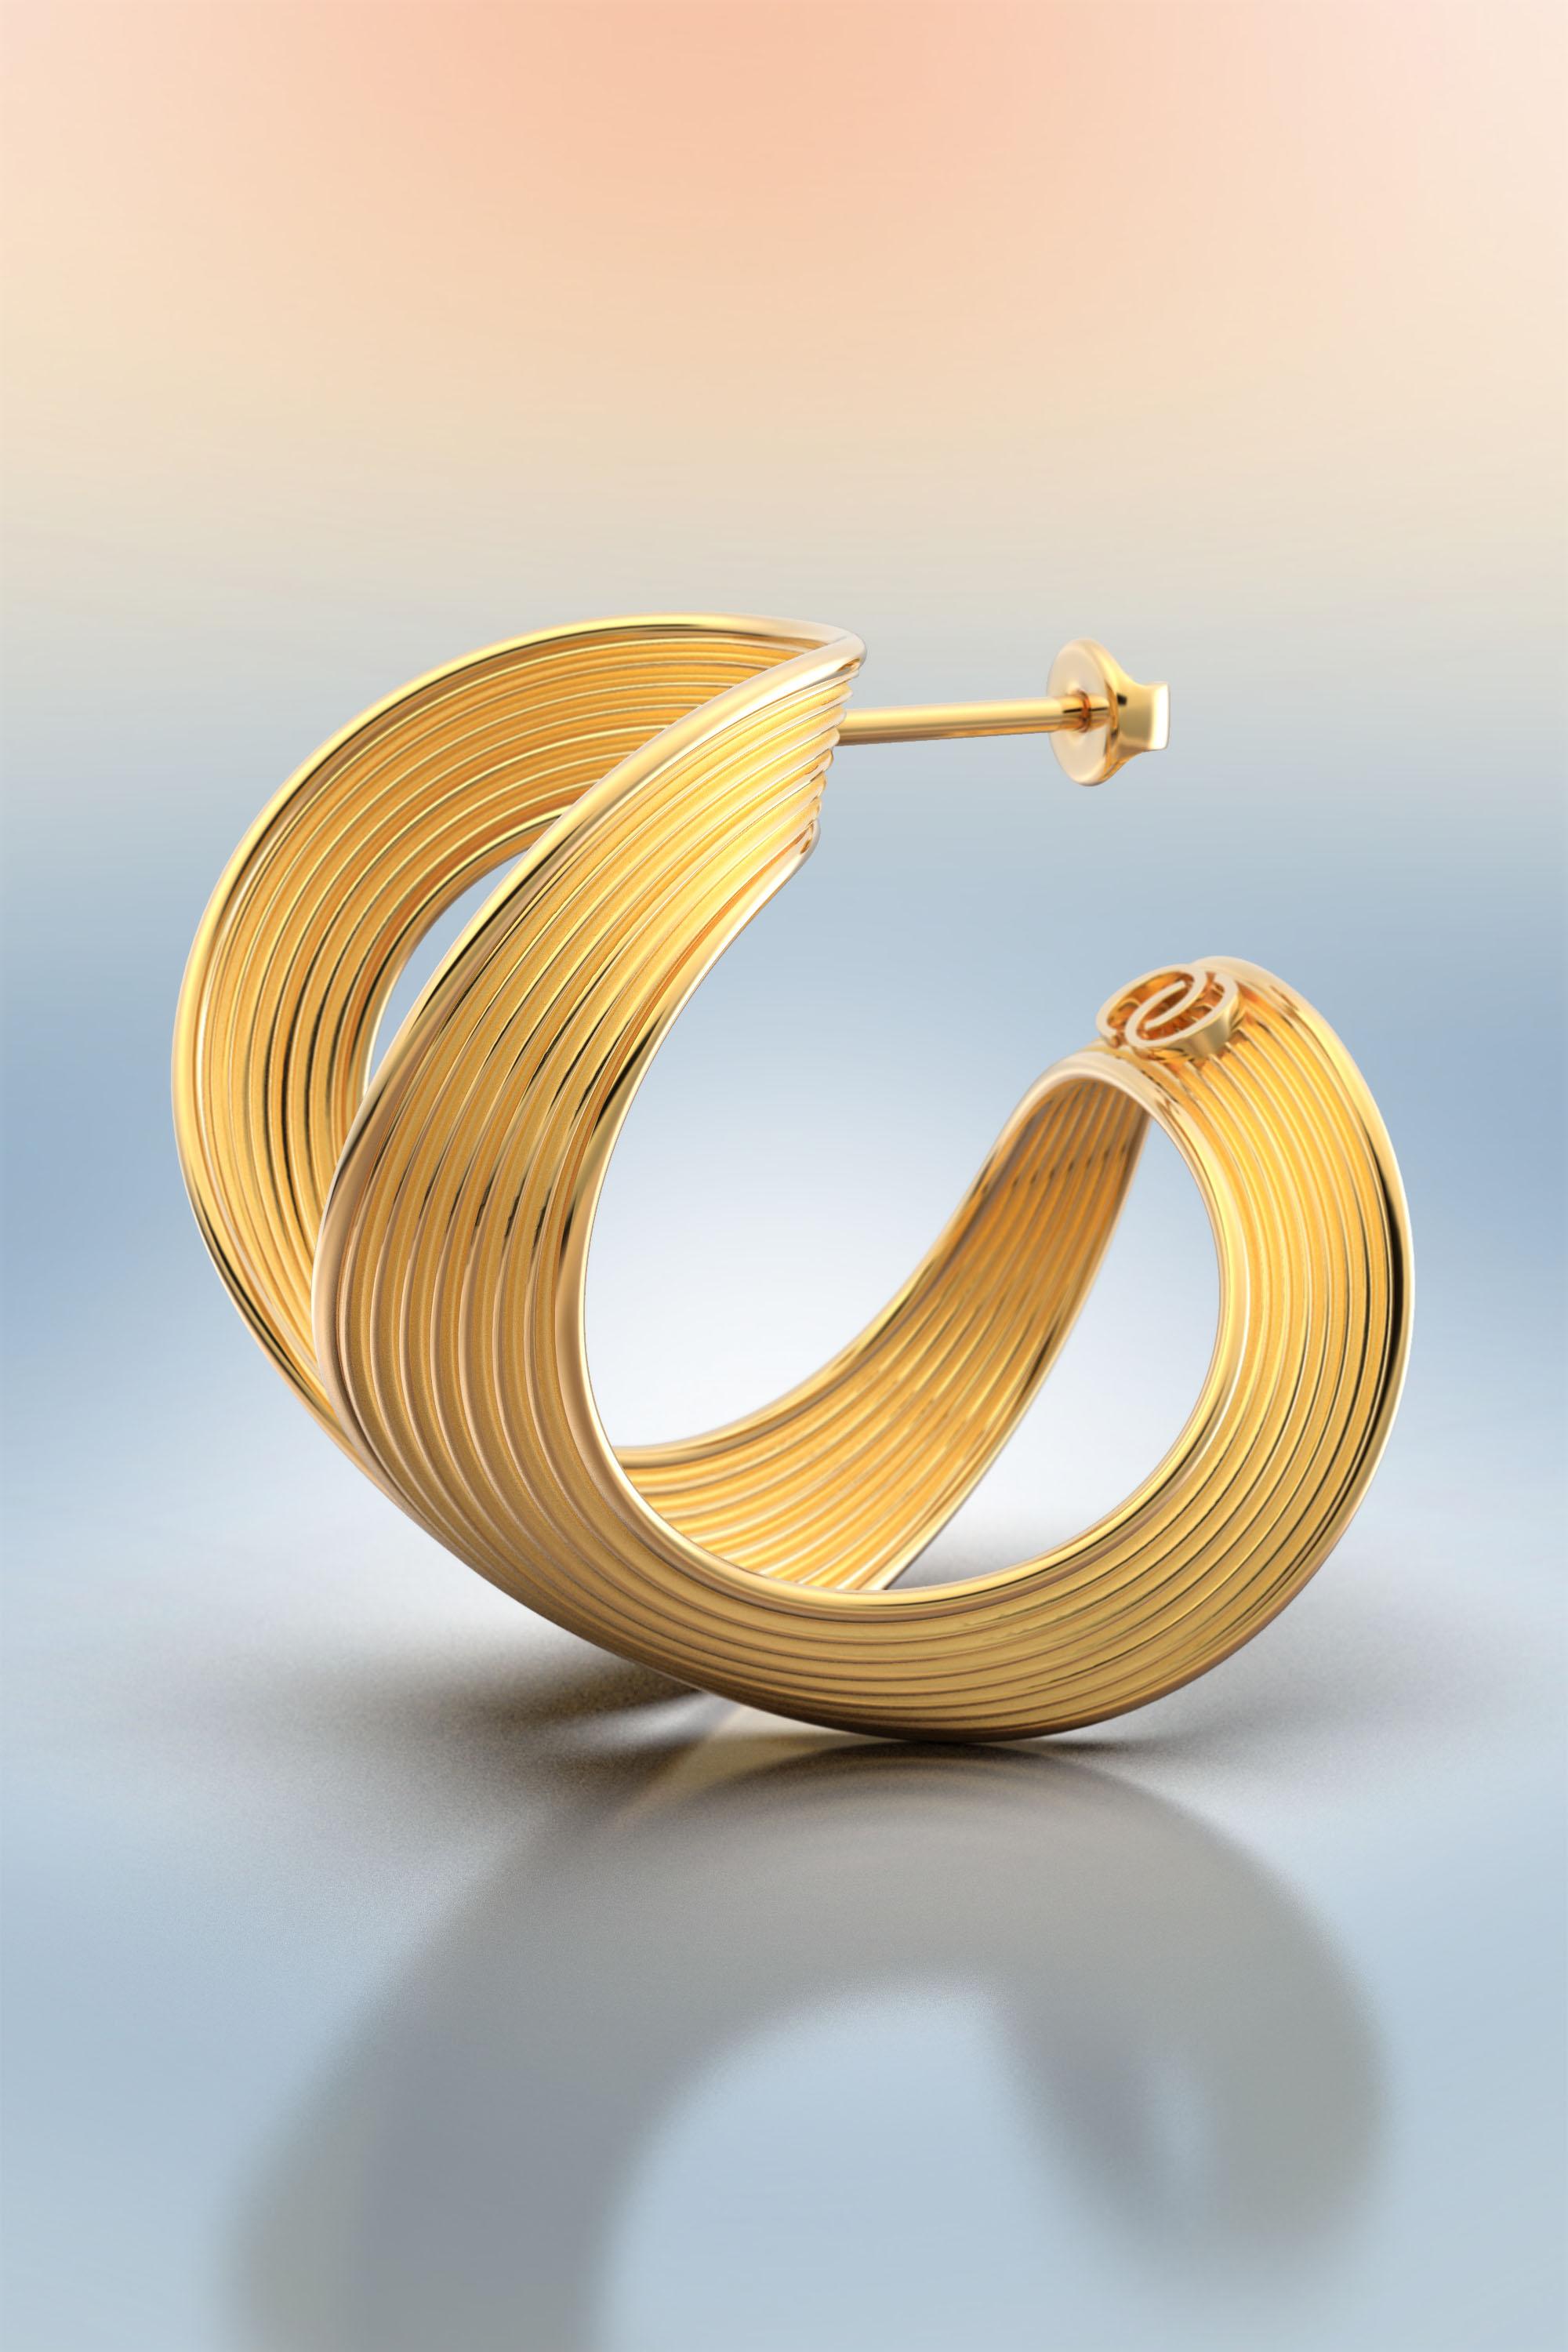 Gold Hoop Earrings, 14 karat large hoops made in Italy by Oltremare Gioielli In New Condition For Sale In Camisano Vicentino, VI